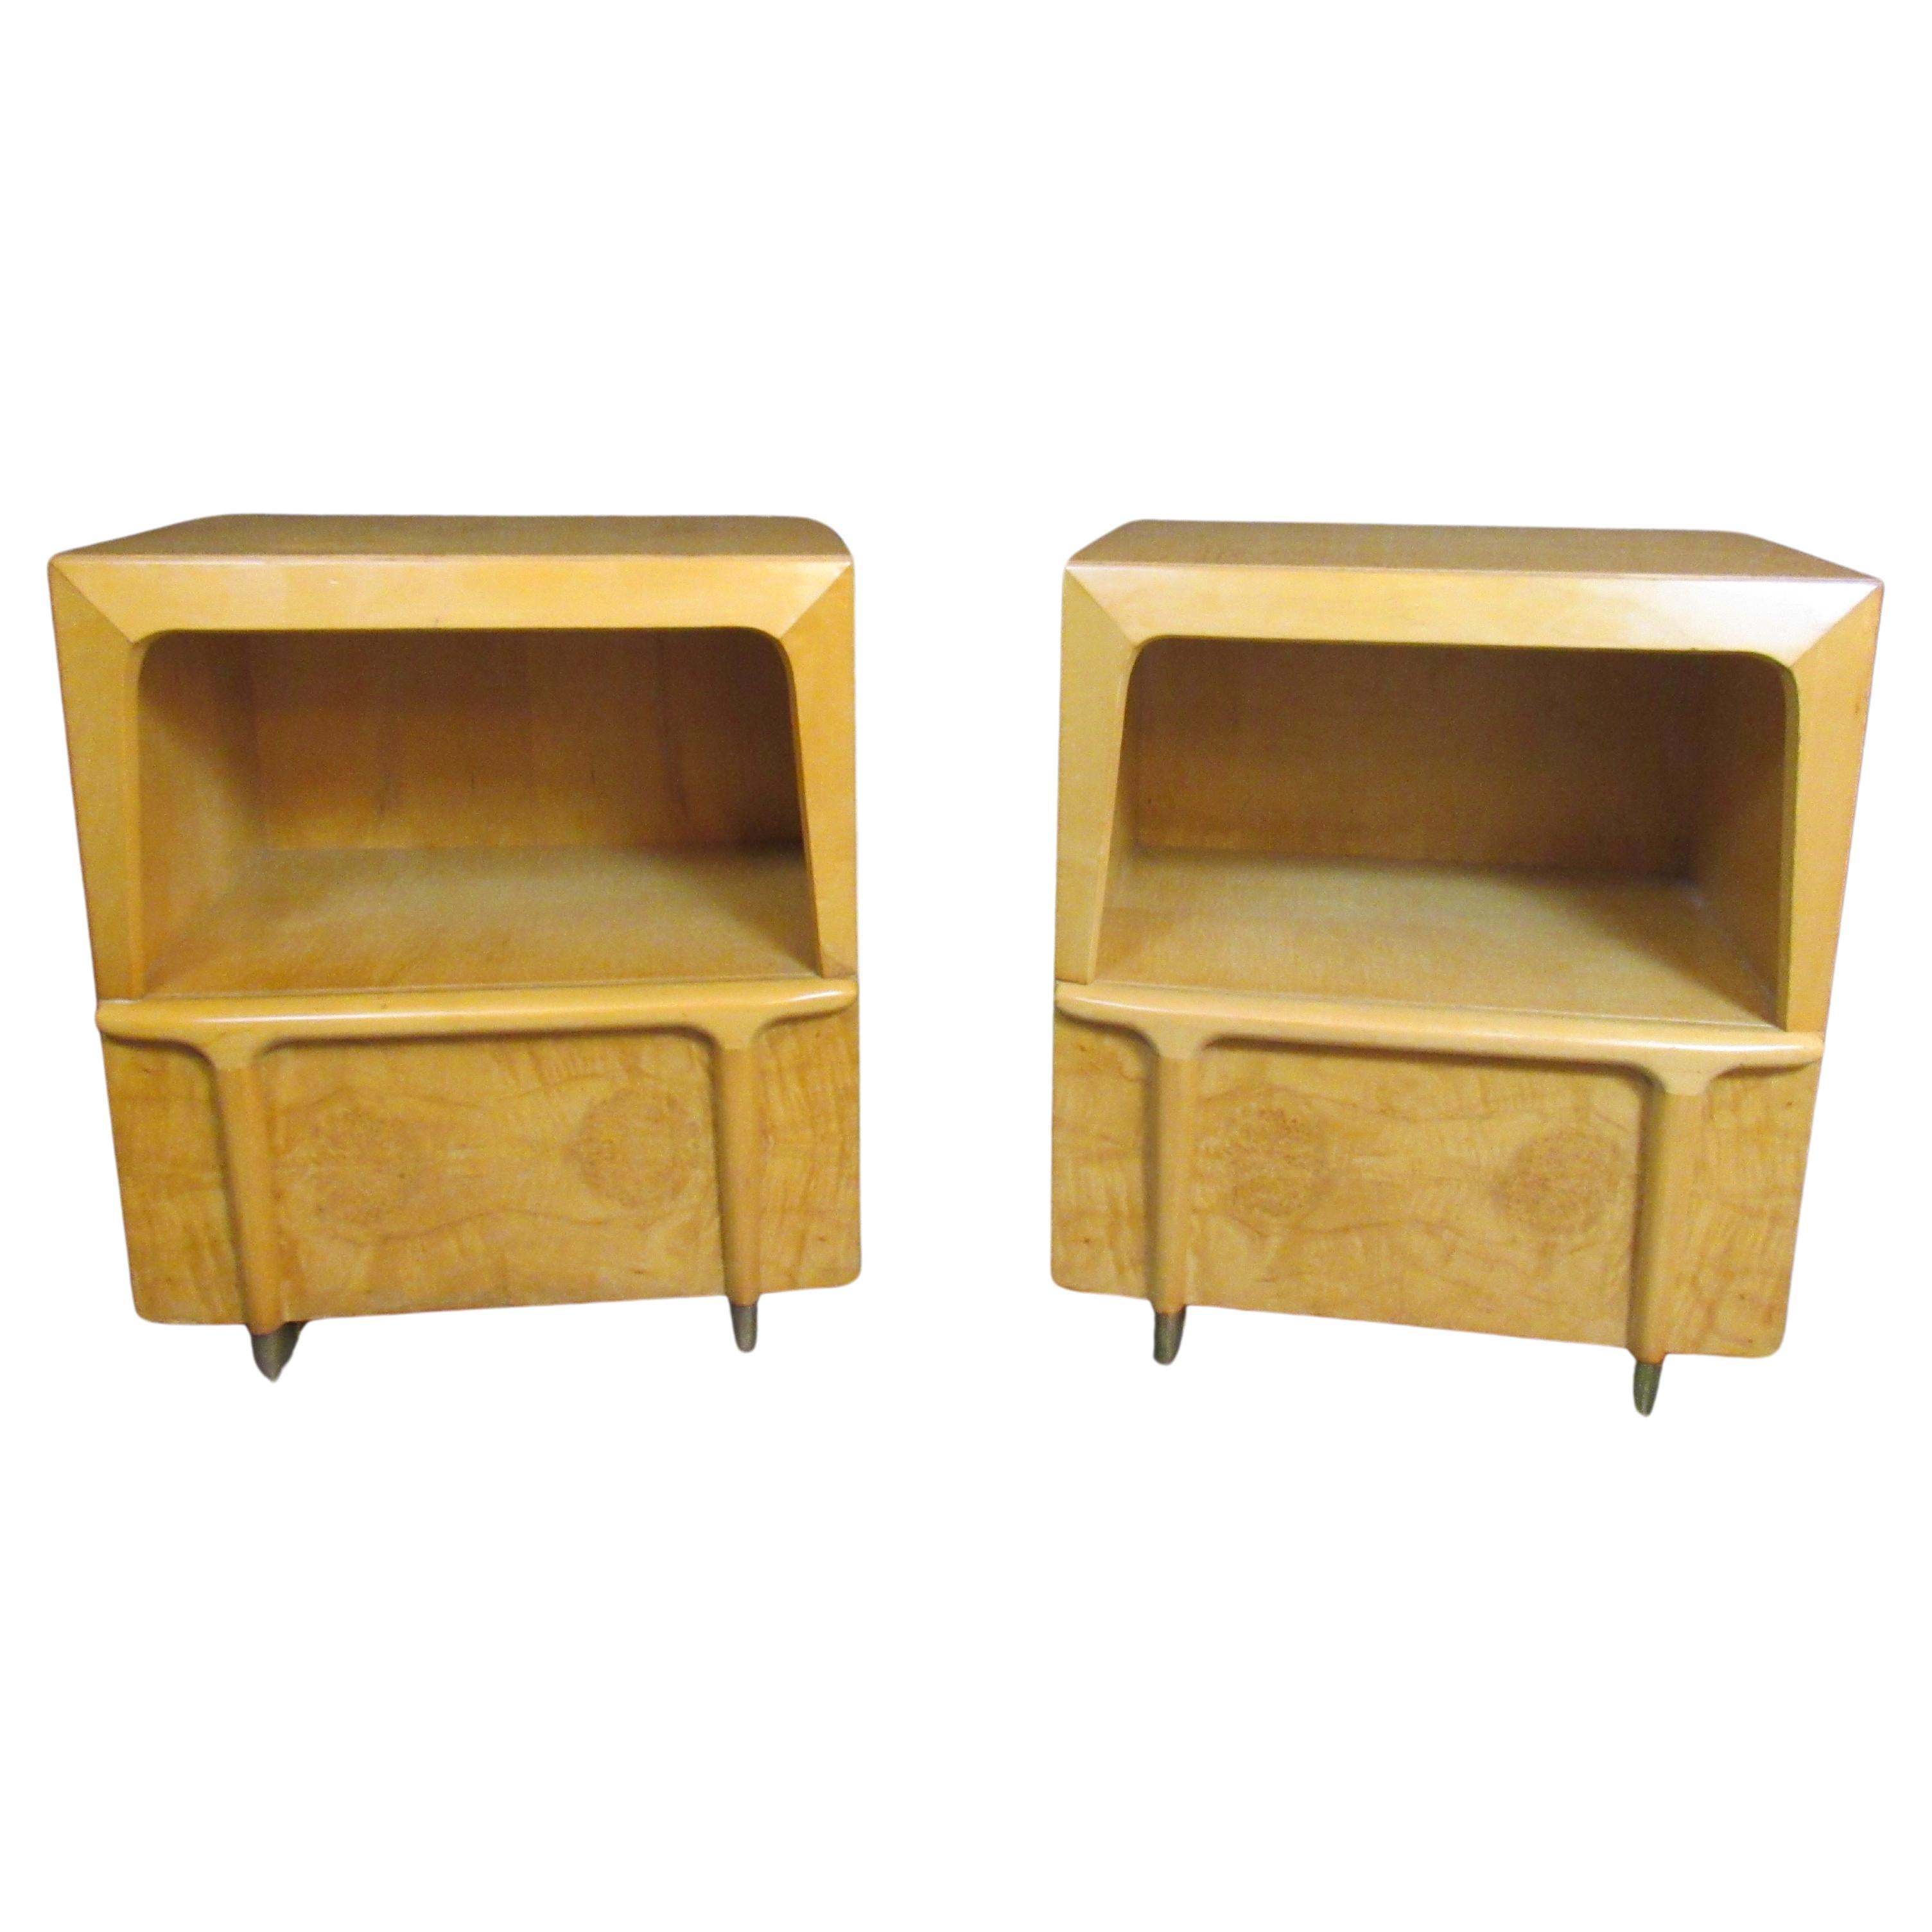 Burled Maple and Brass Nightstands after Heywood Wakefield